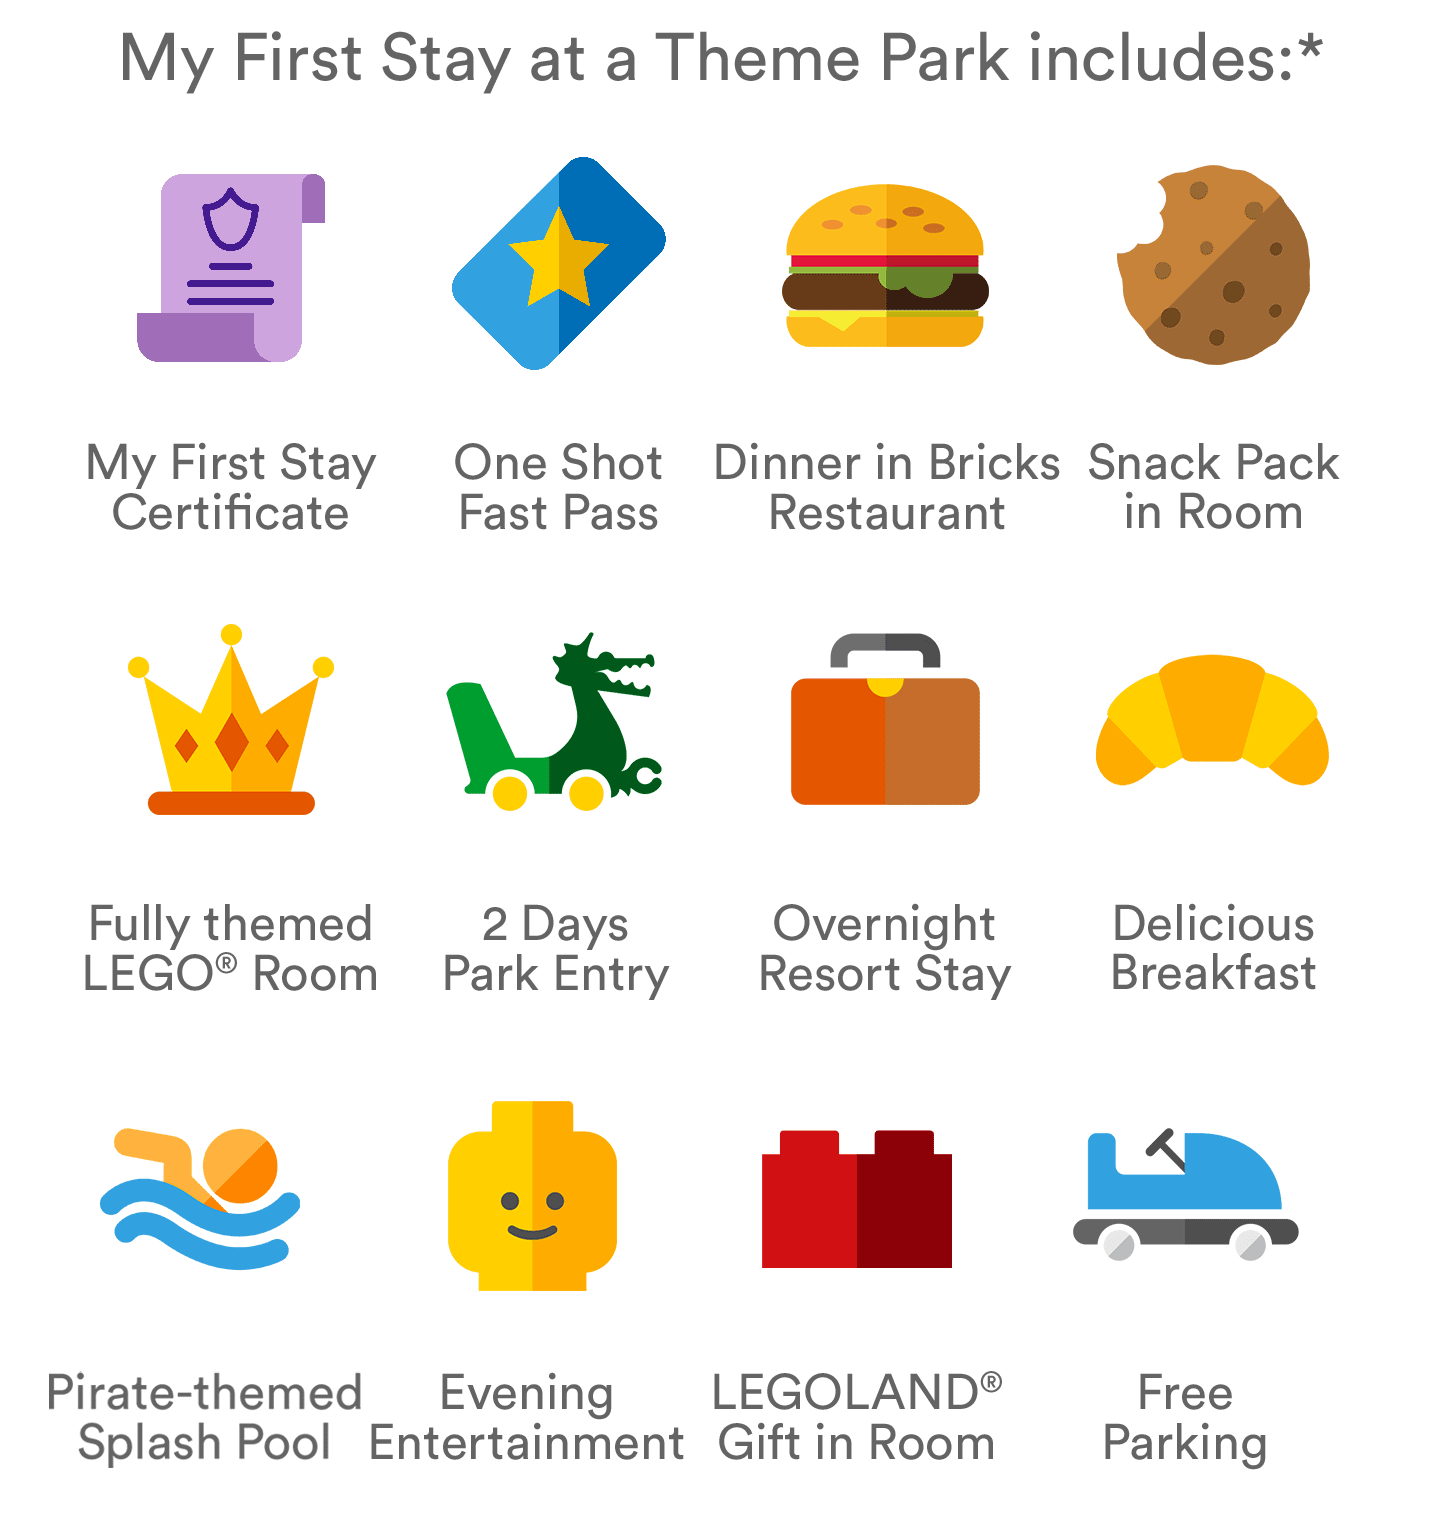 Benefits of your My First Stay at a Theme Park LEGOLAND Holiday